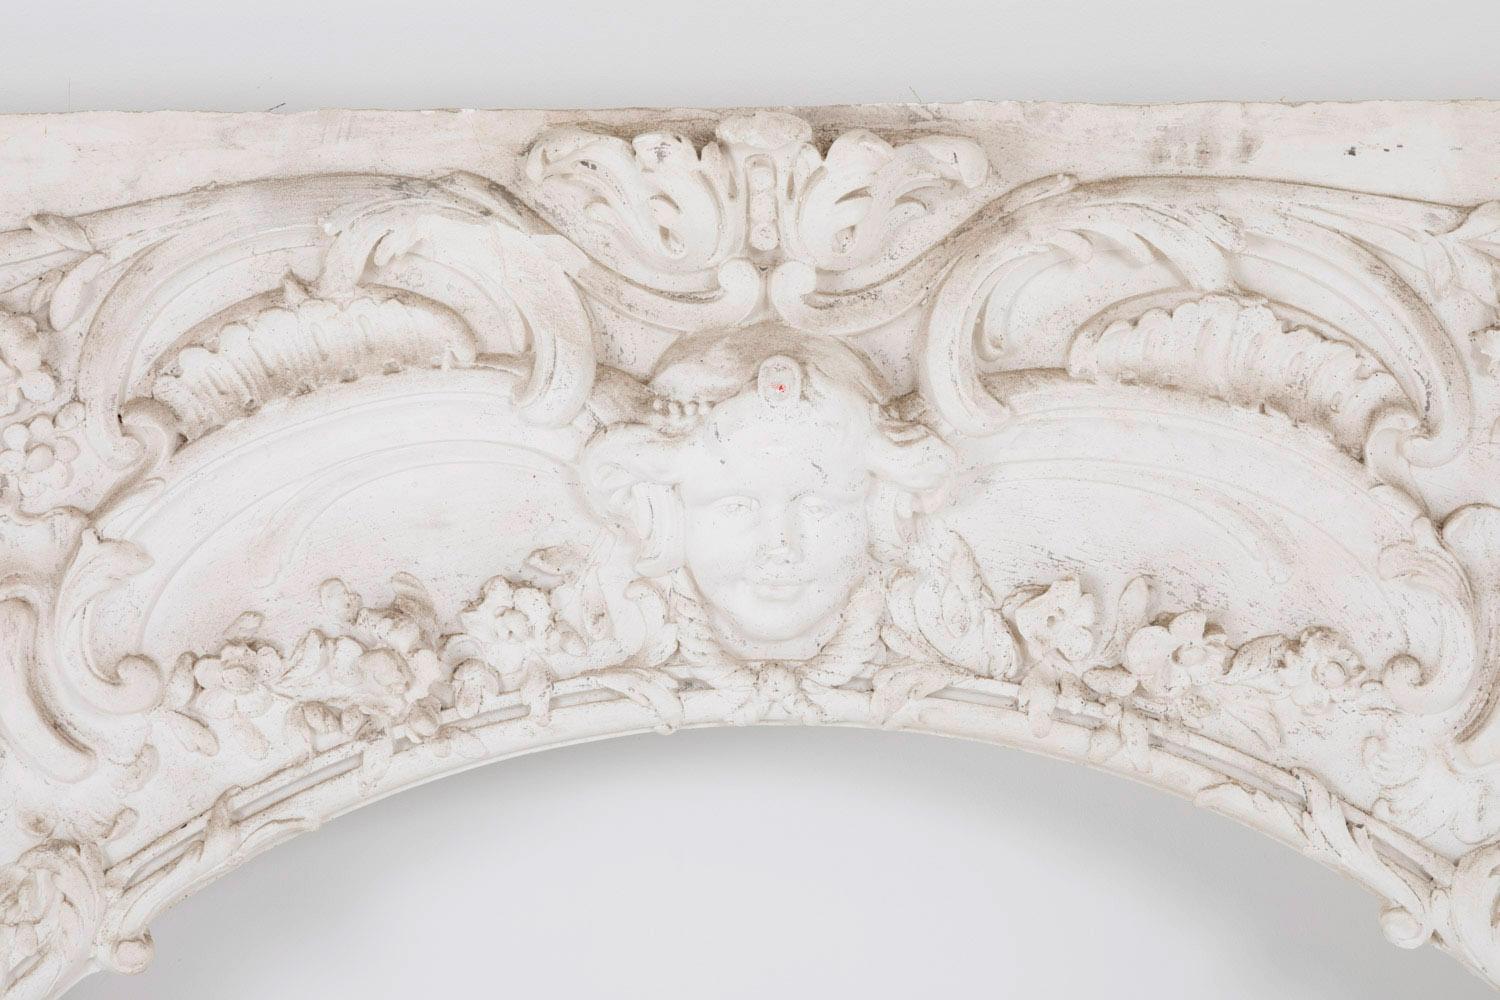 Louis XV style rectangular stucco wood panel with a oval shaped central hole surrounding by carved ornament such as flowers, foliage, scrolls, acanthus leaves ; in the upper central part is decorated with a putto mascaron.

Panel mounted on a